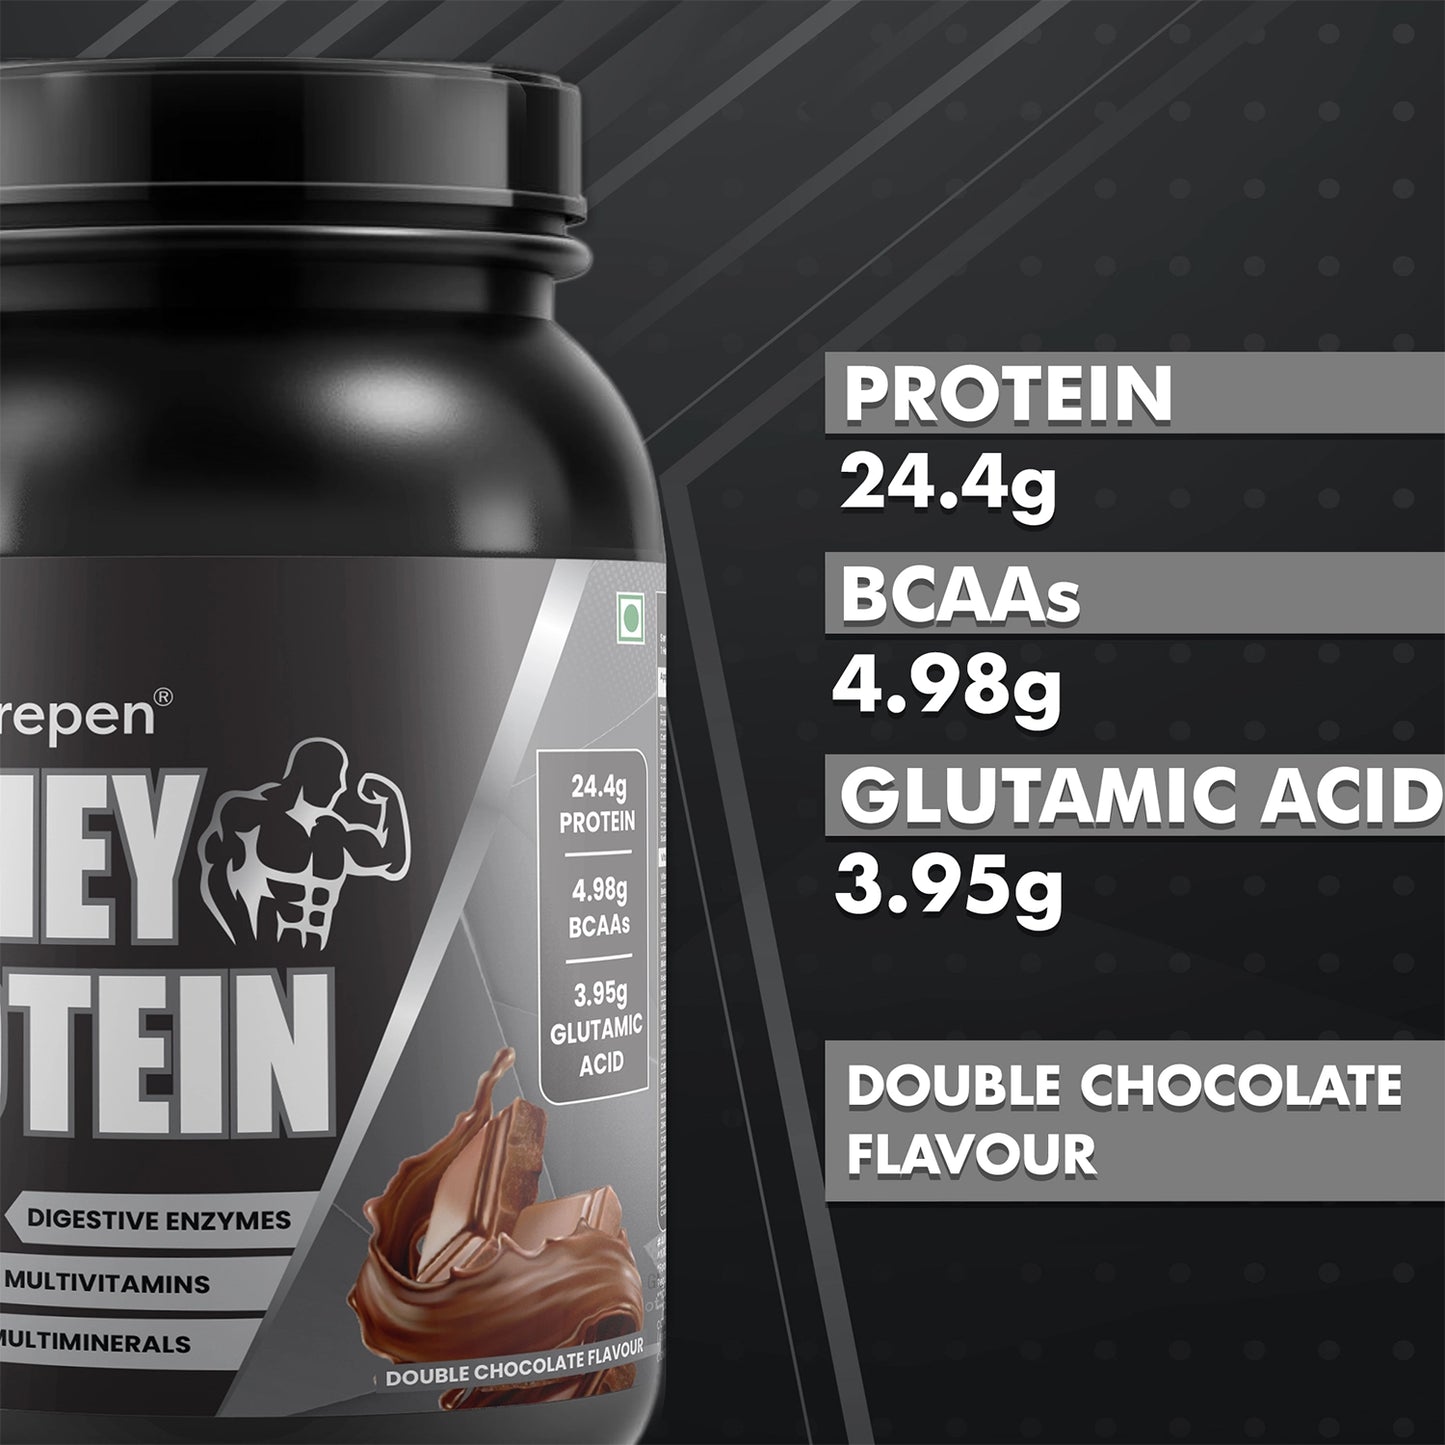 Dr. Morepen 100% Whey Protein (1 Kg)